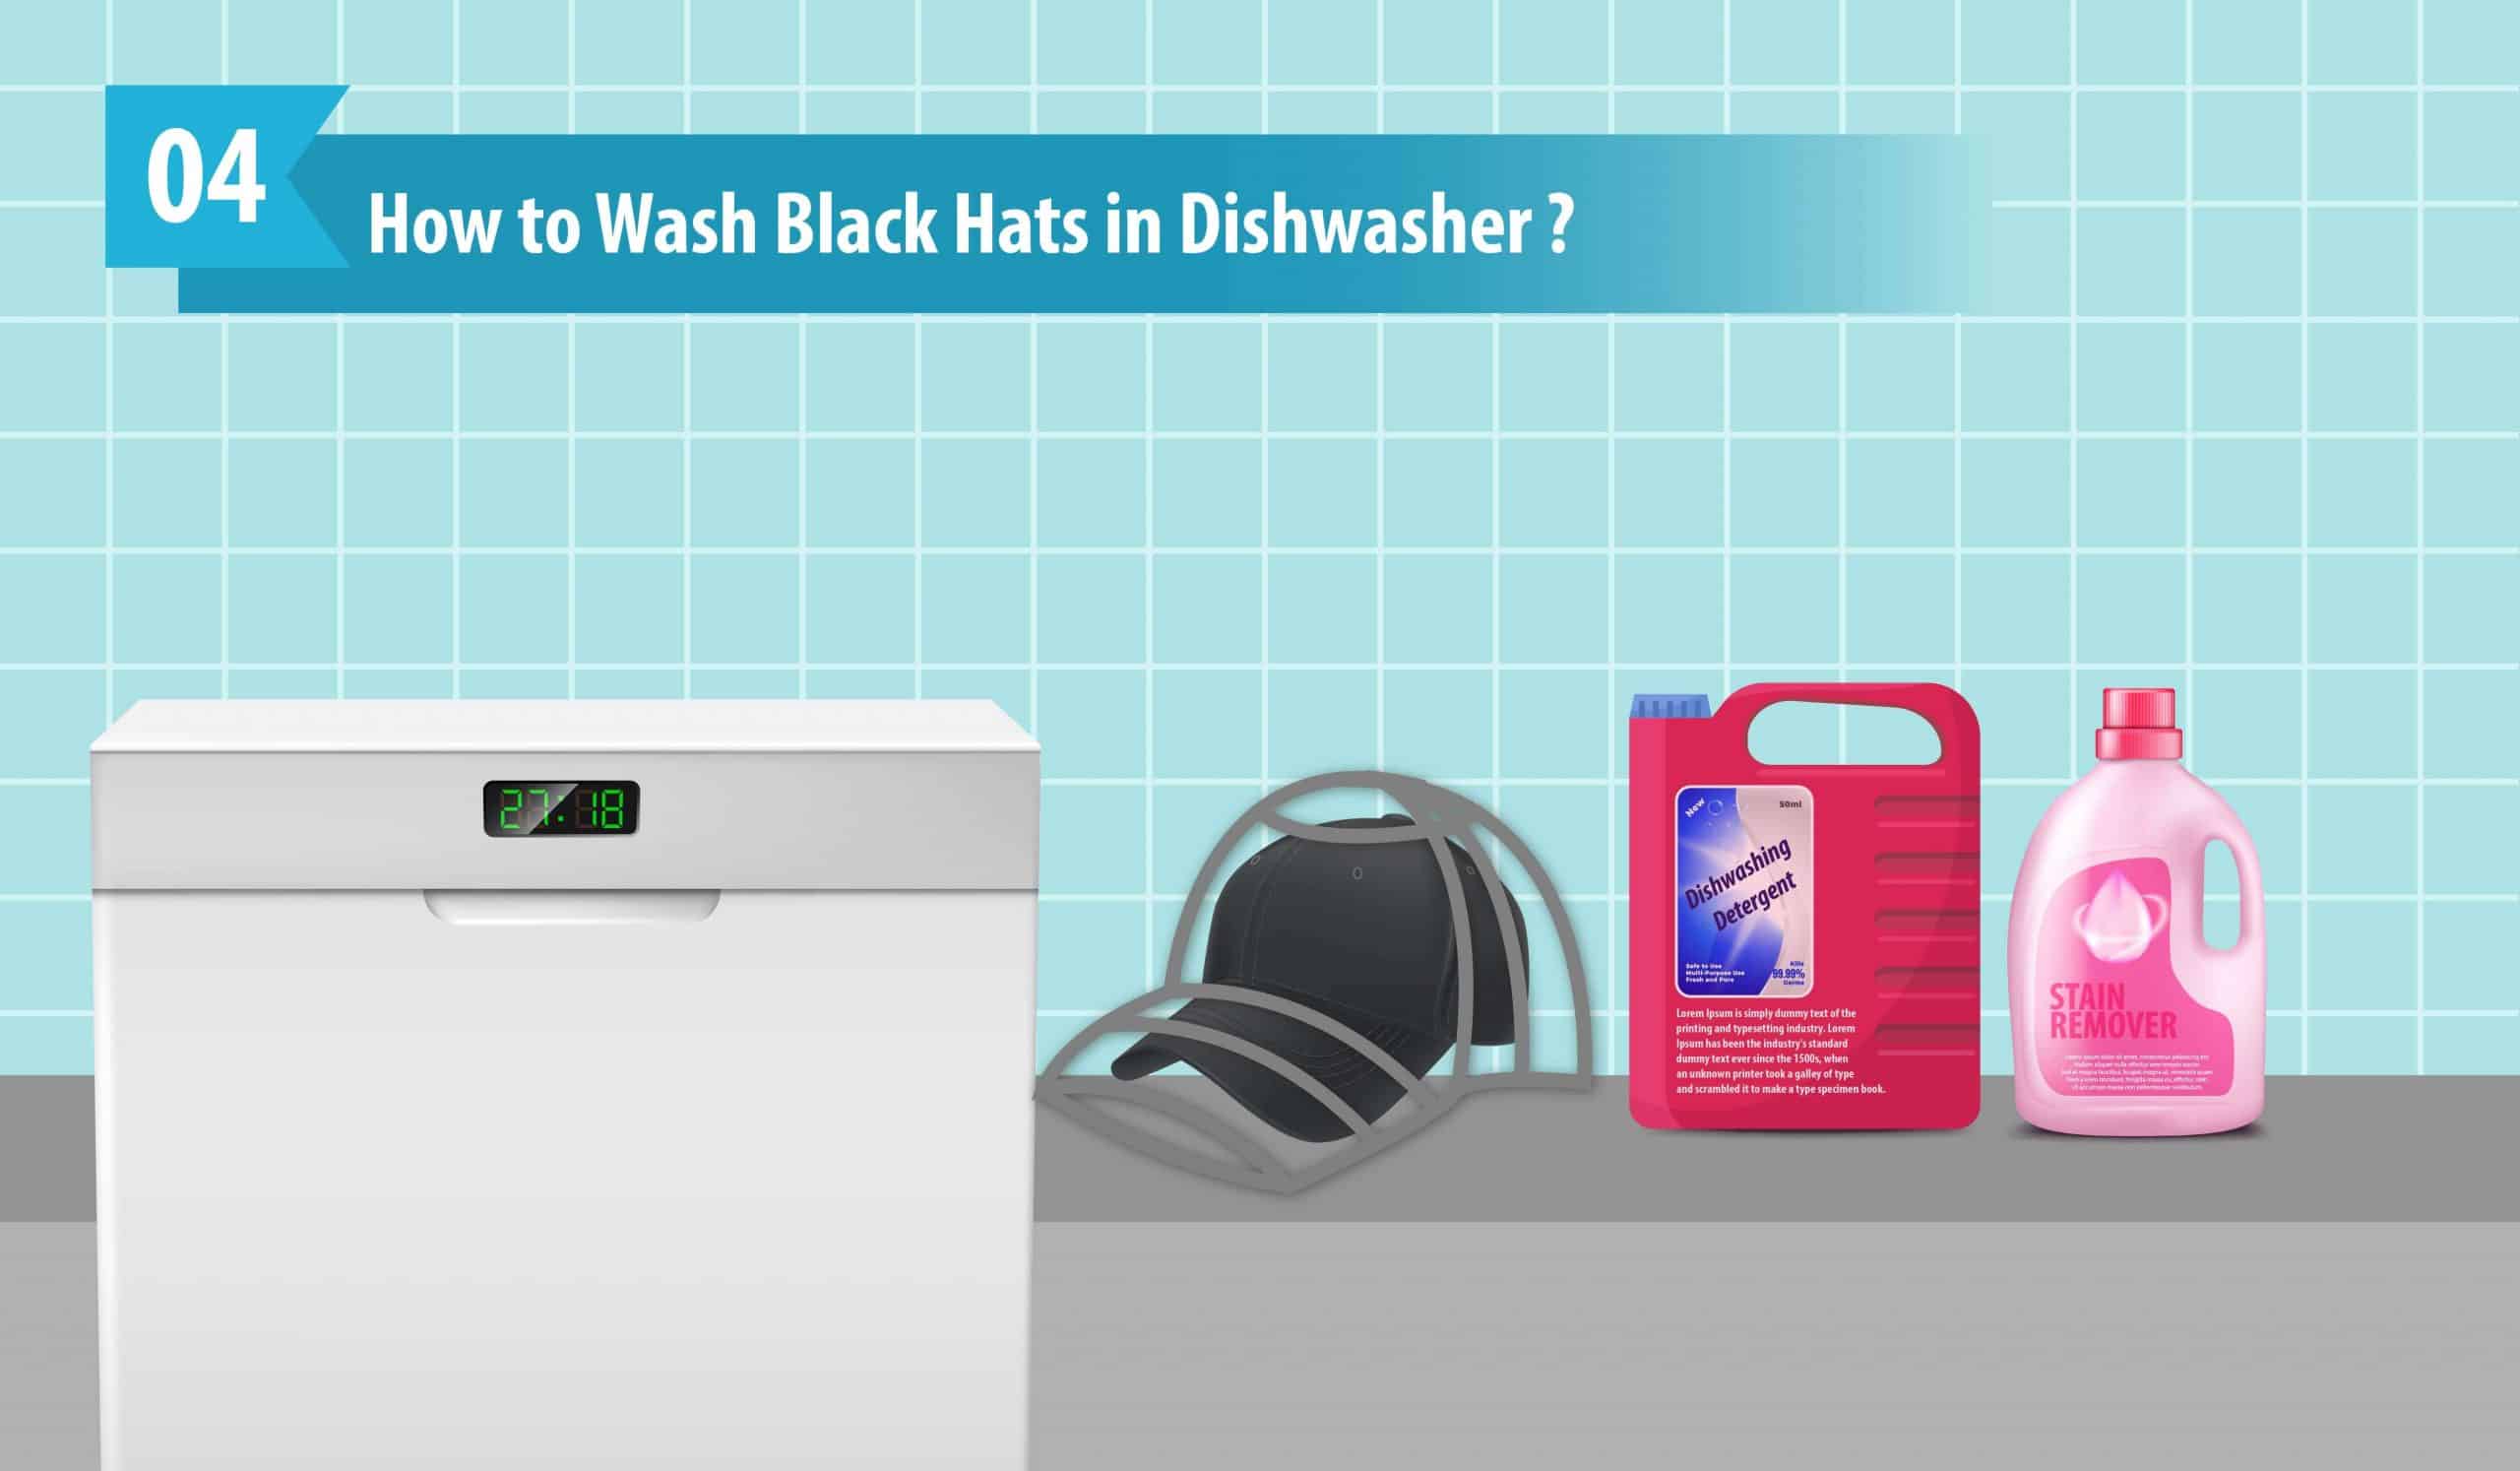 How to Wash Black Hats in Dishwasher